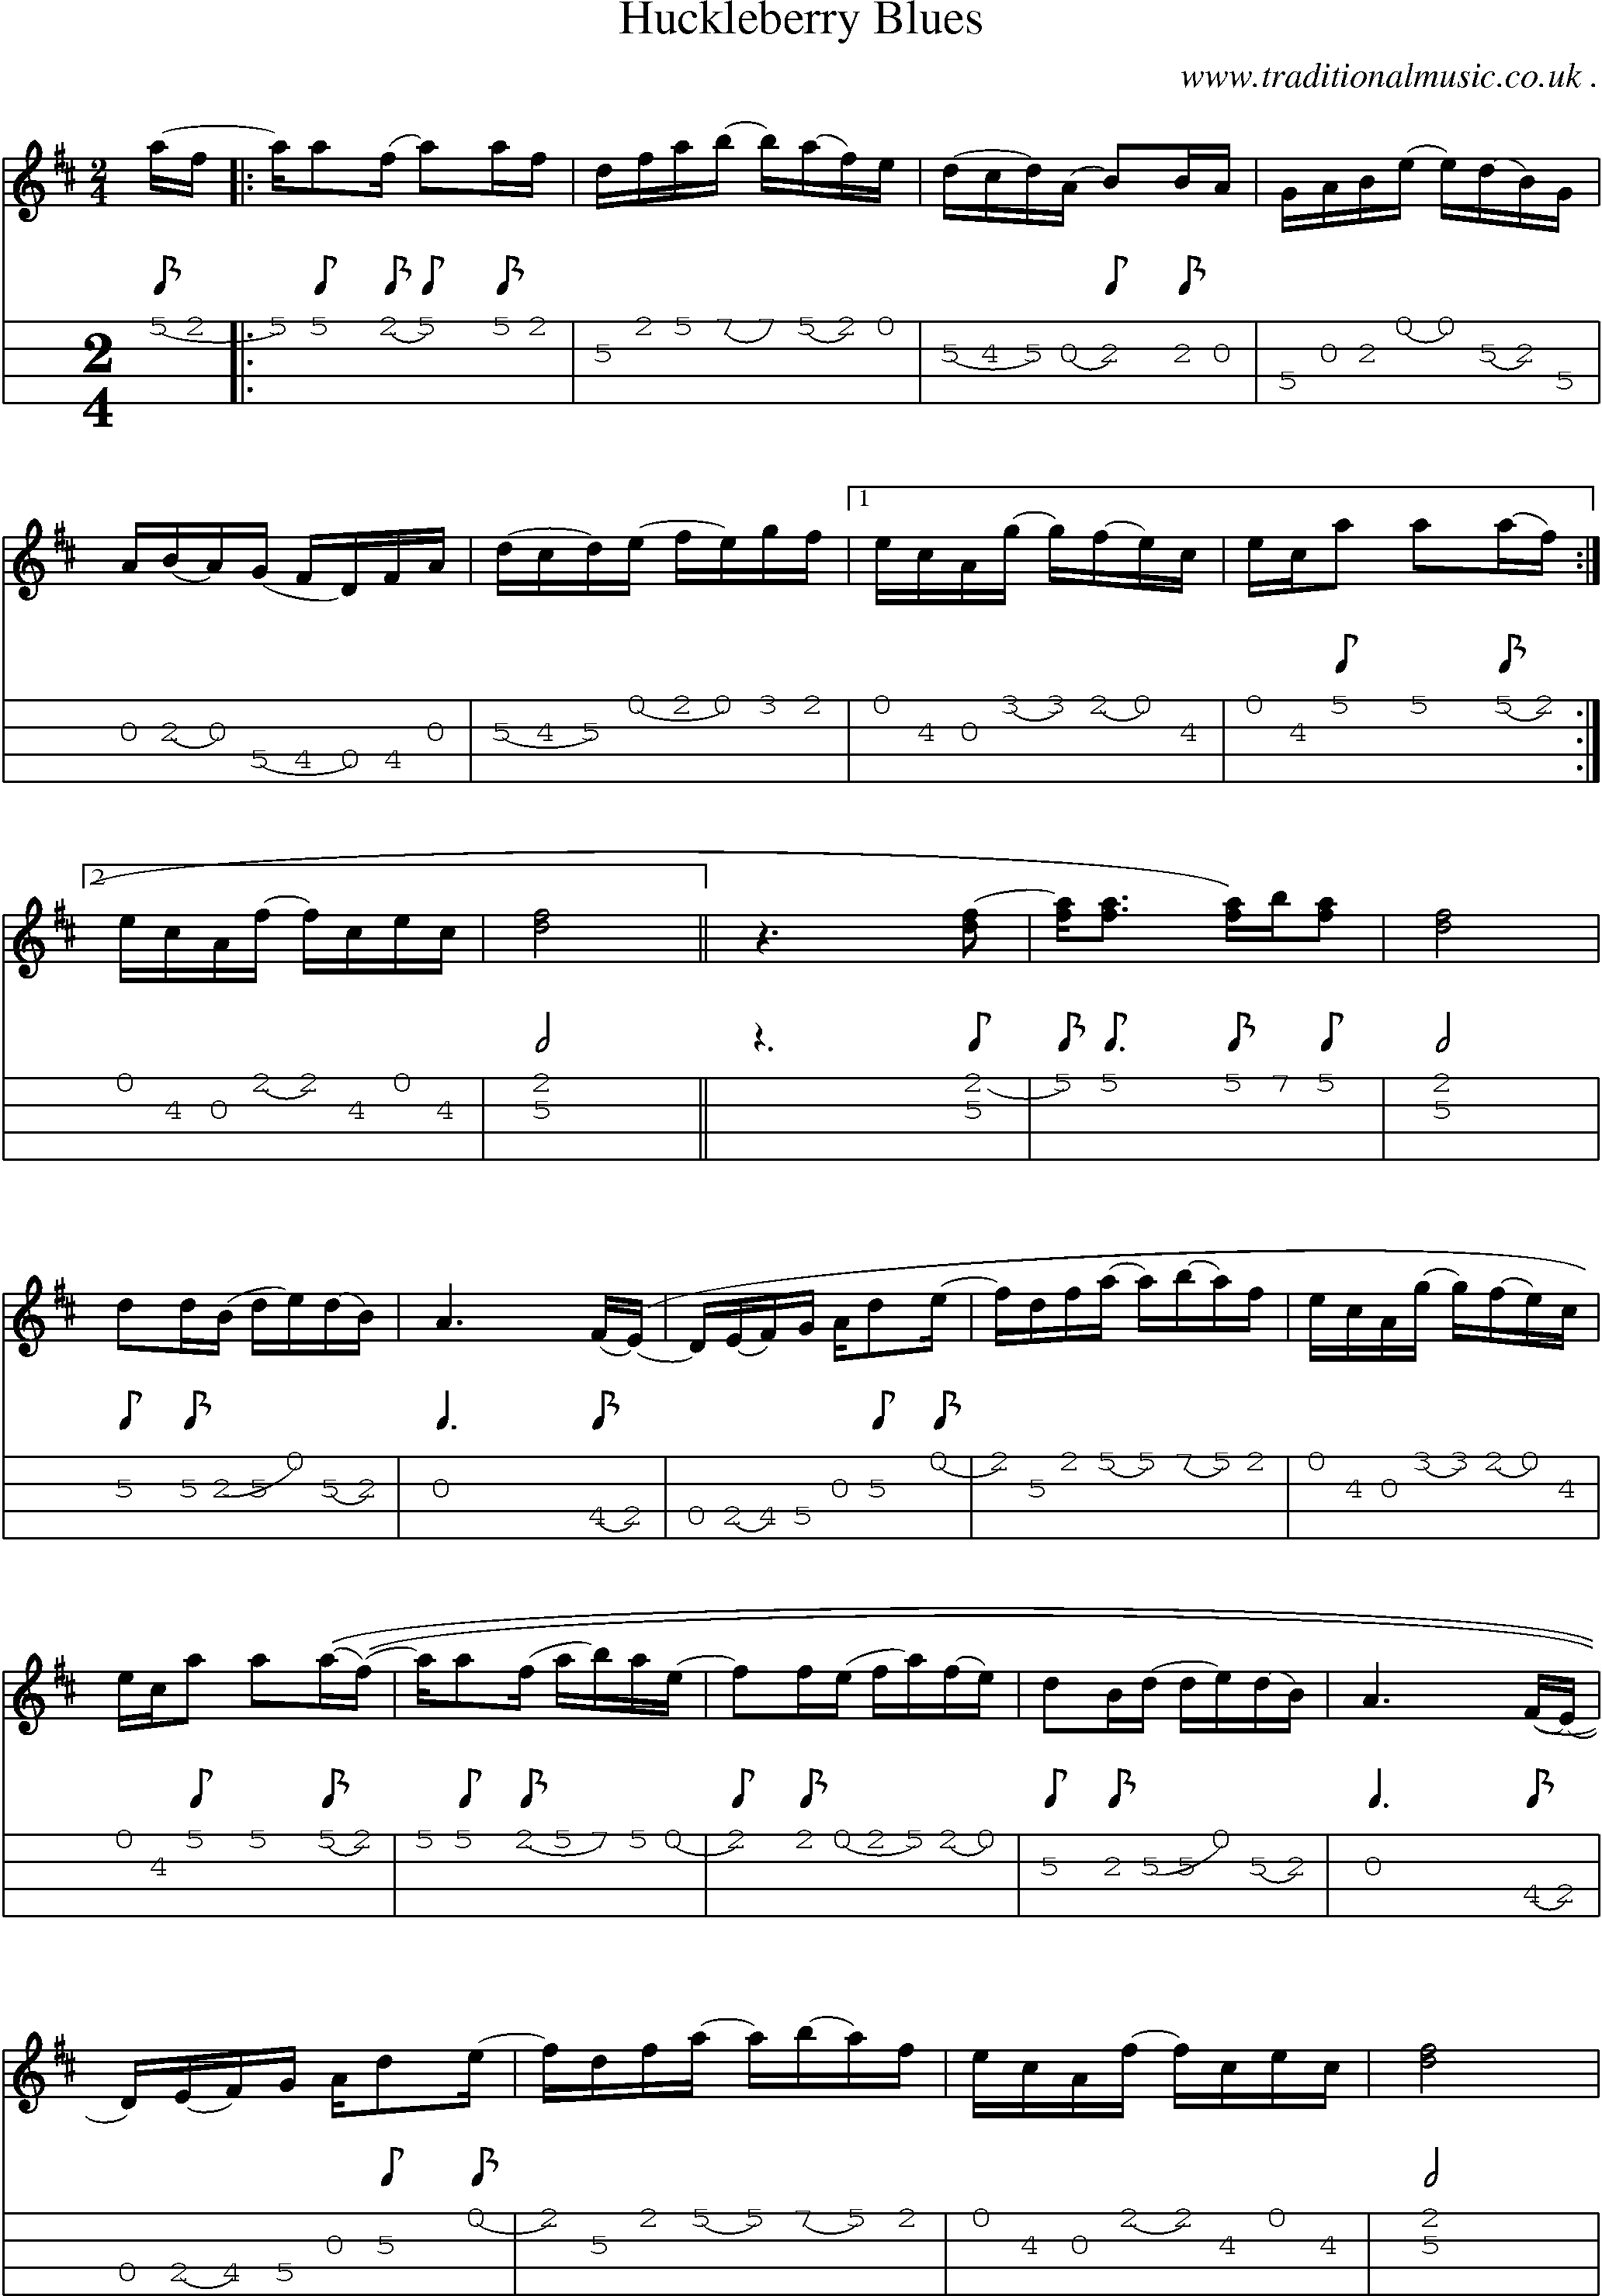 Music Score and Mandolin Tabs for Huckleberry Blues